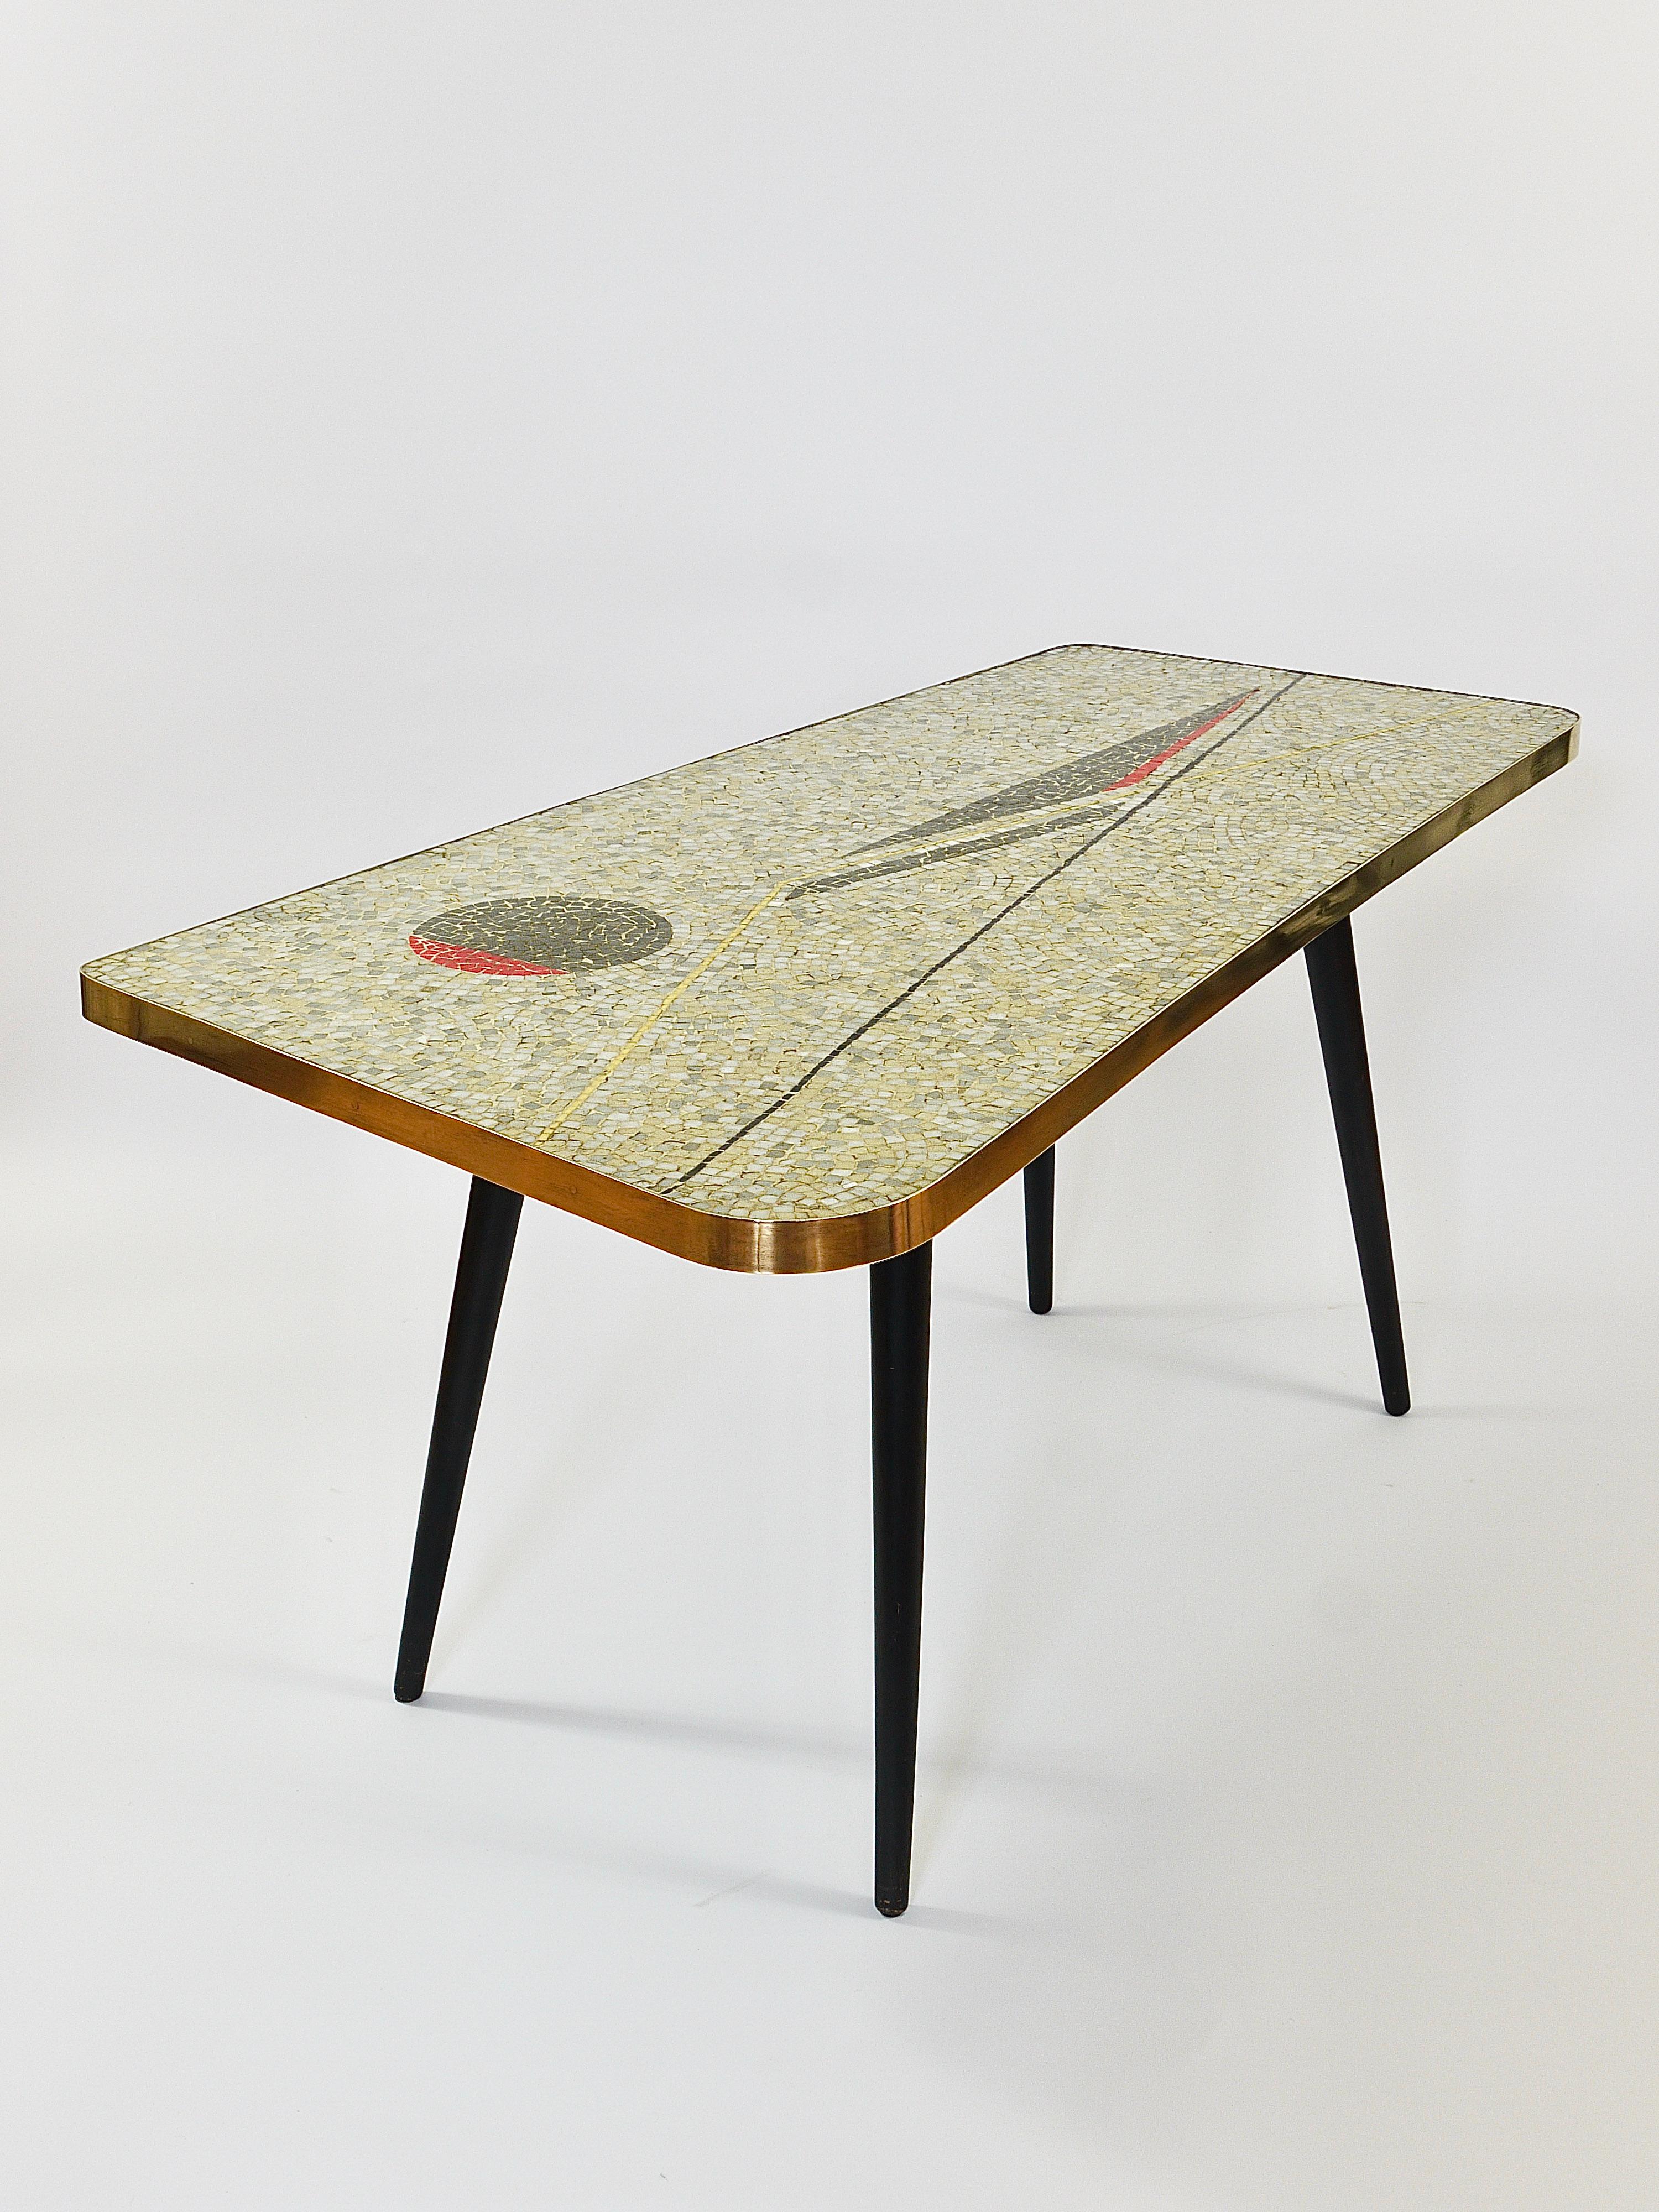 Berthold Muller Asymmetrical Mosaic Tile Coffee or Sofa Table, Germany, 1950s For Sale 4